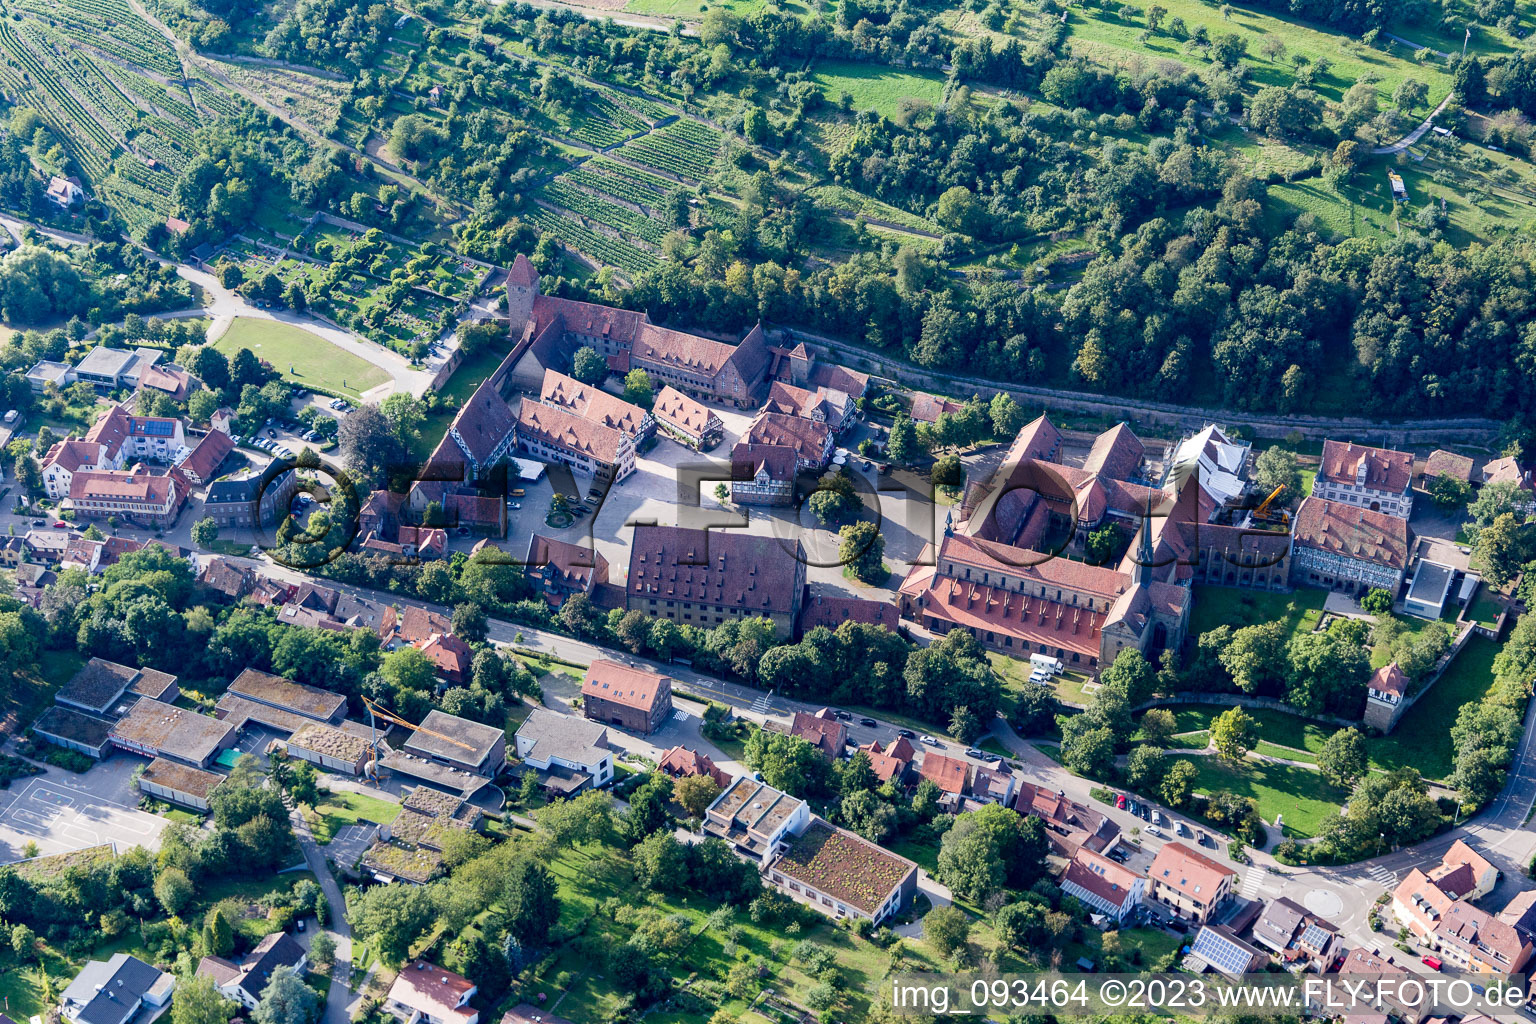 Maulbronn in the state Baden-Wuerttemberg, Germany seen from above